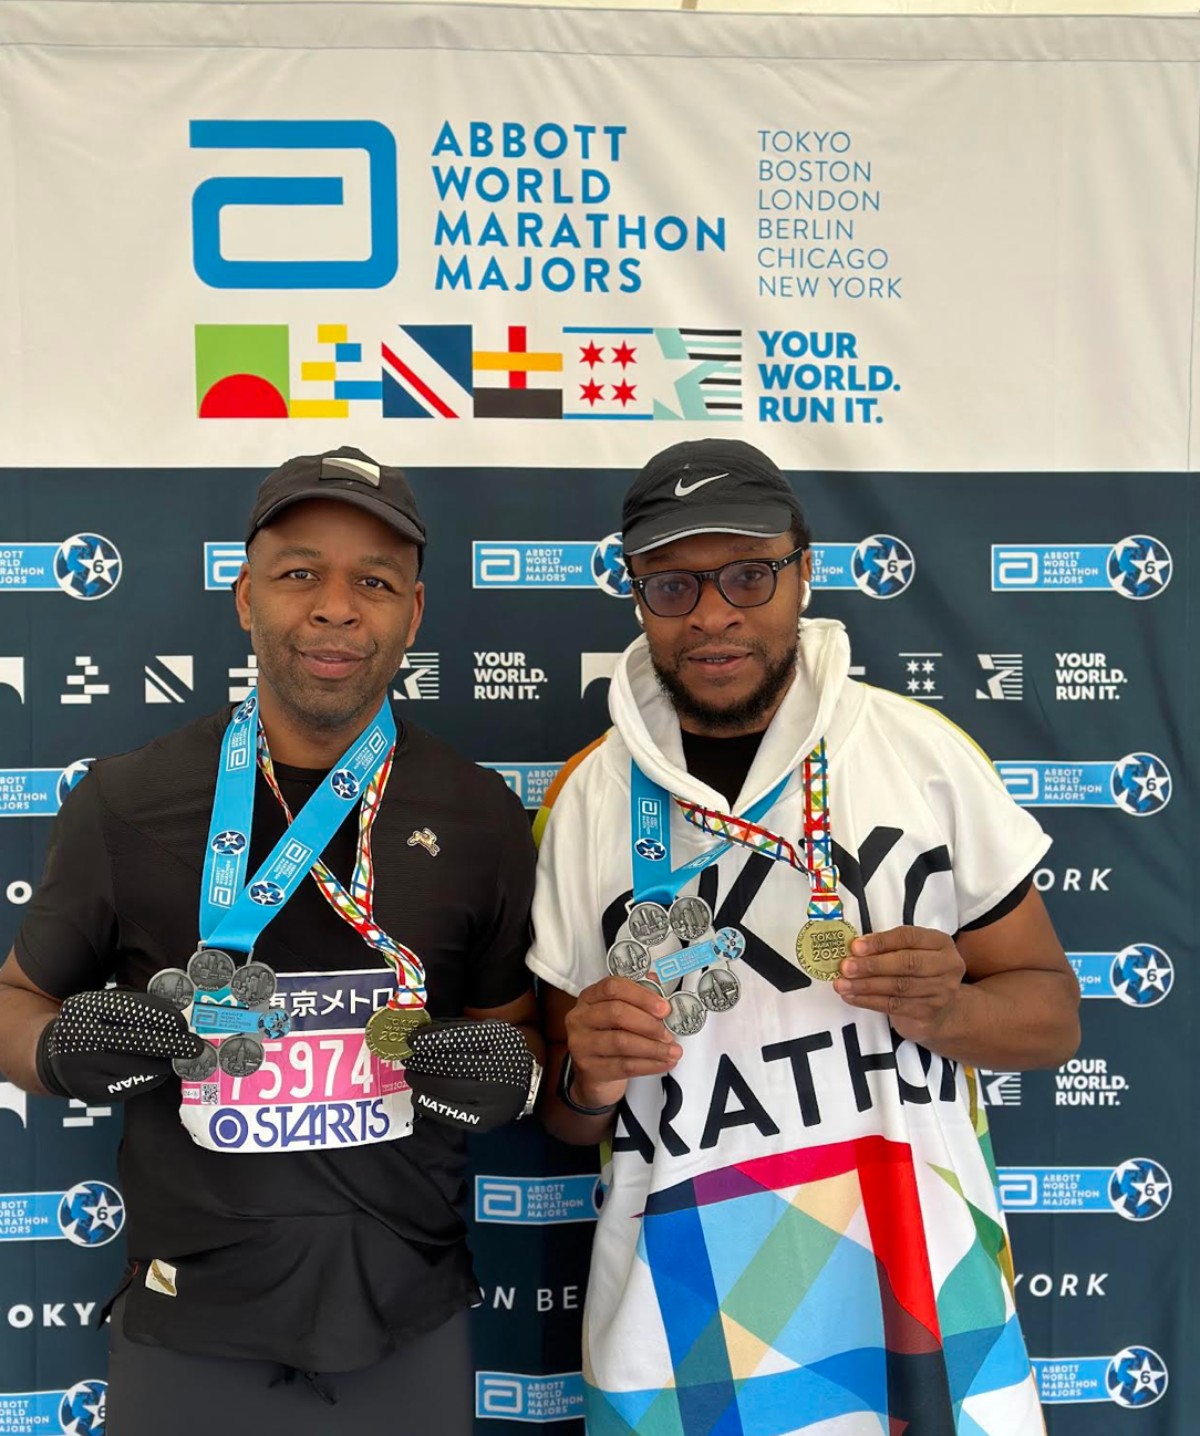 Charles Moore (left) successfully completed all of six the Abbott World Marathon Majors in 2023.